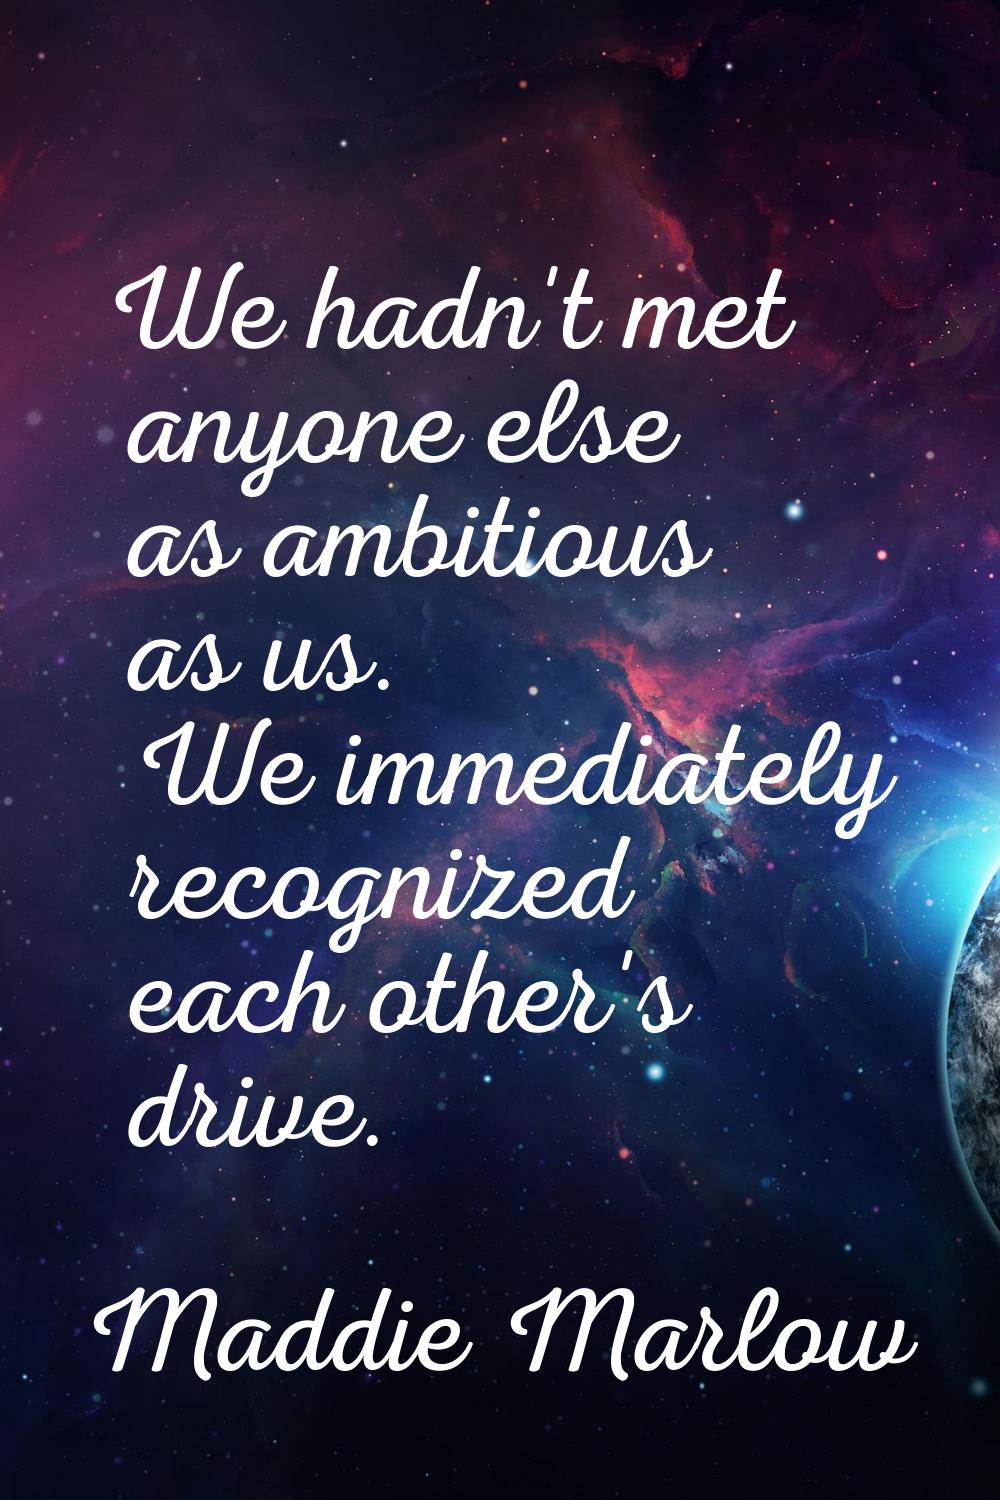 We hadn't met anyone else as ambitious as us. We immediately recognized each other's drive.